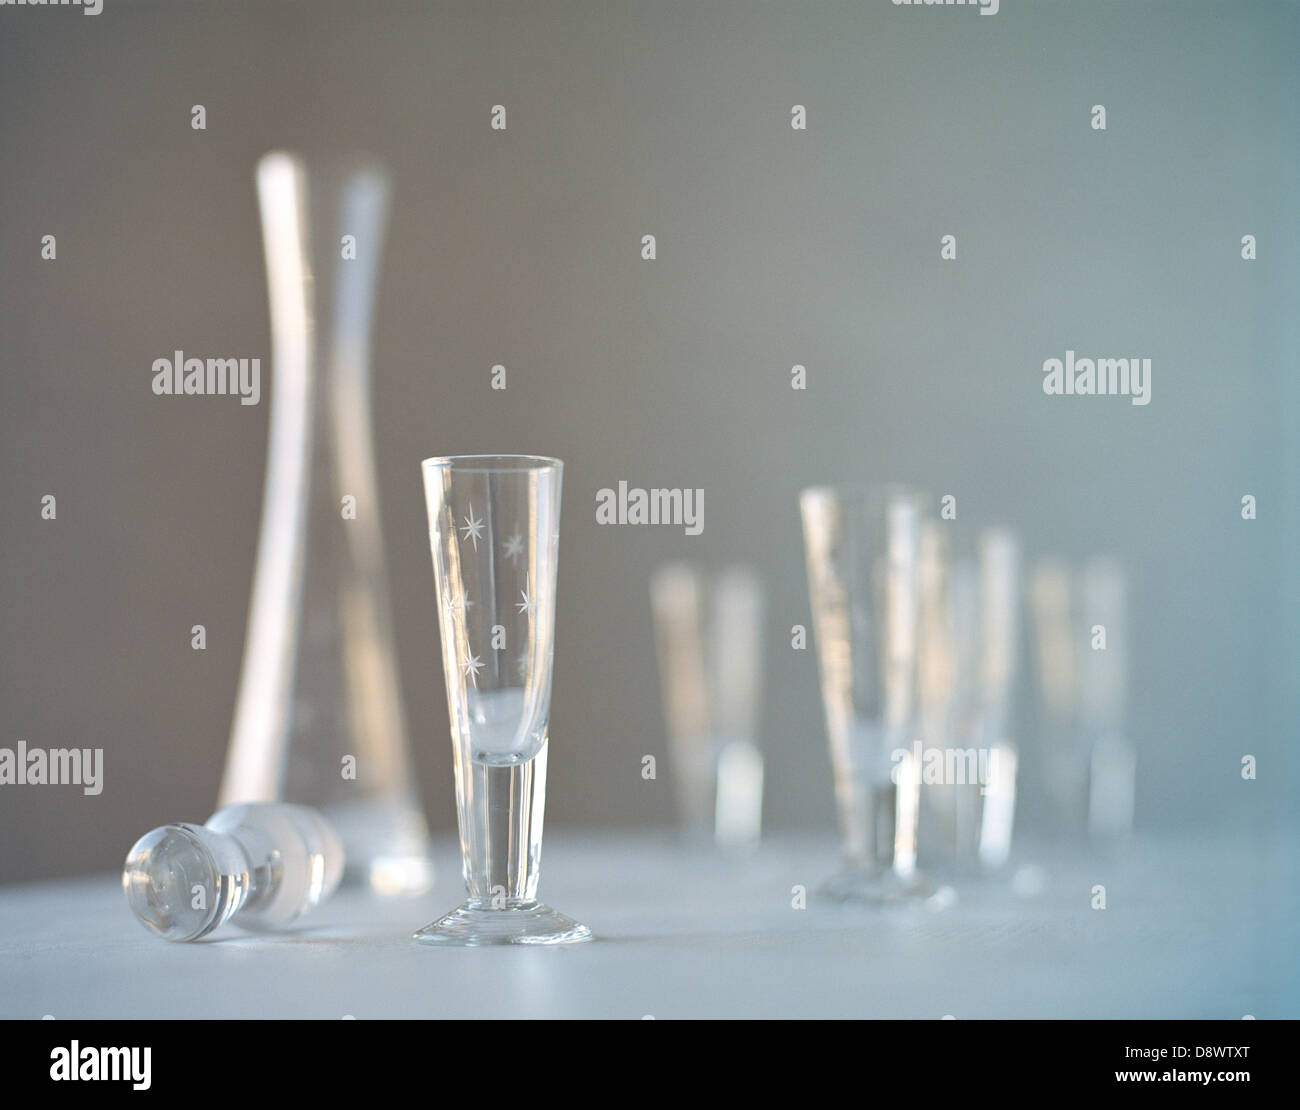 Dram glass on a table Stock Photo